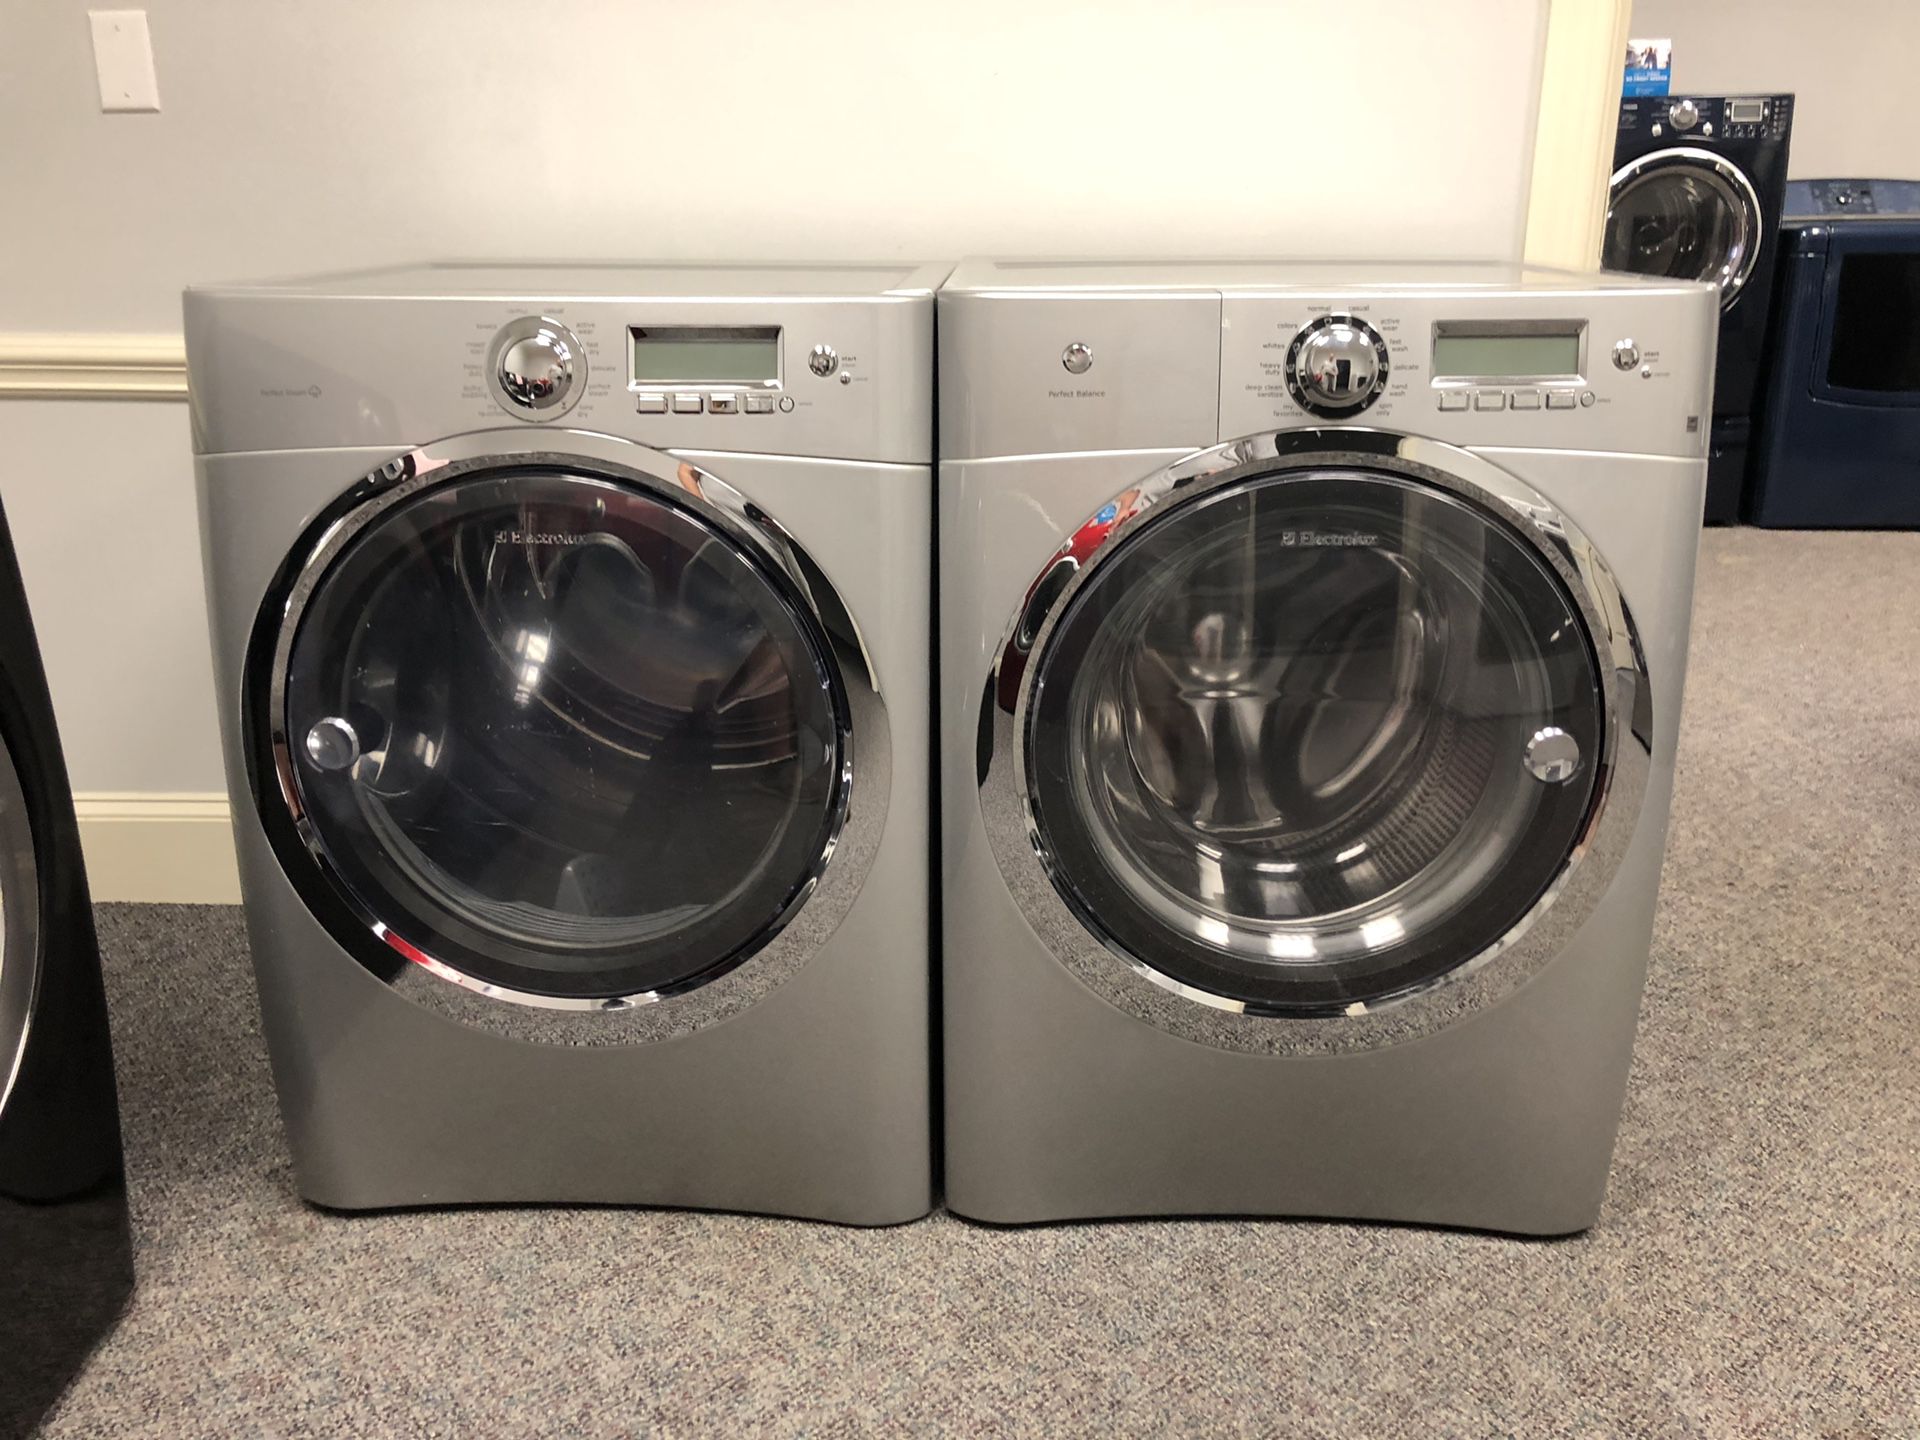 SILVER ELECTROLUX front load washer and dryer set